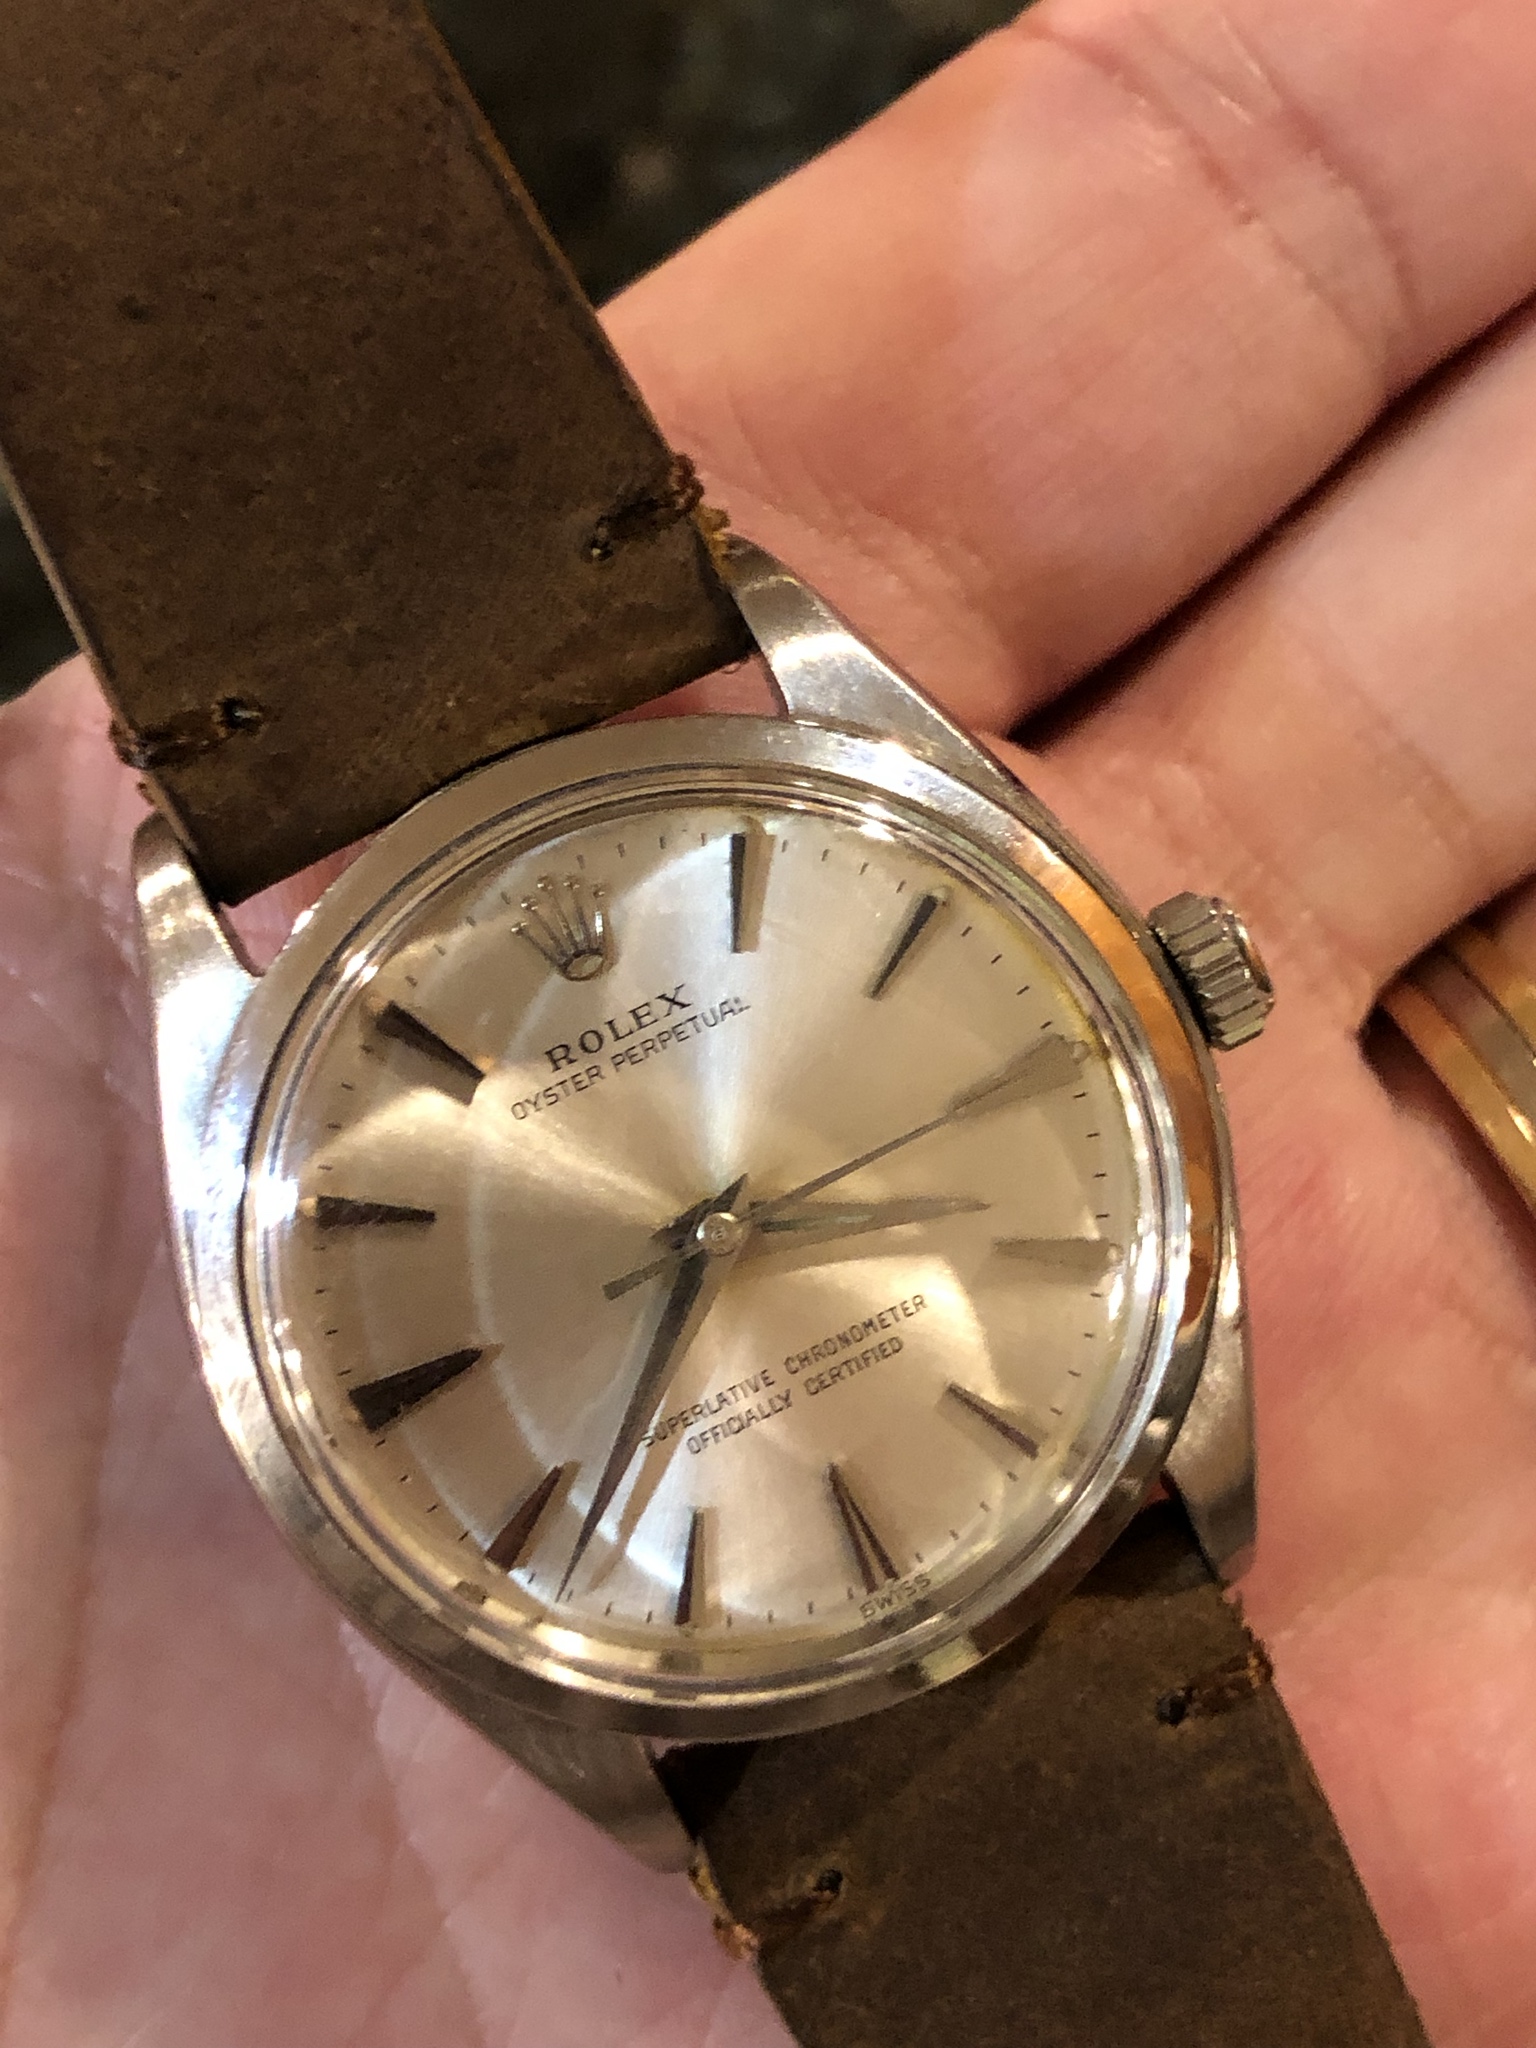 1950 rolex oyster perpetual